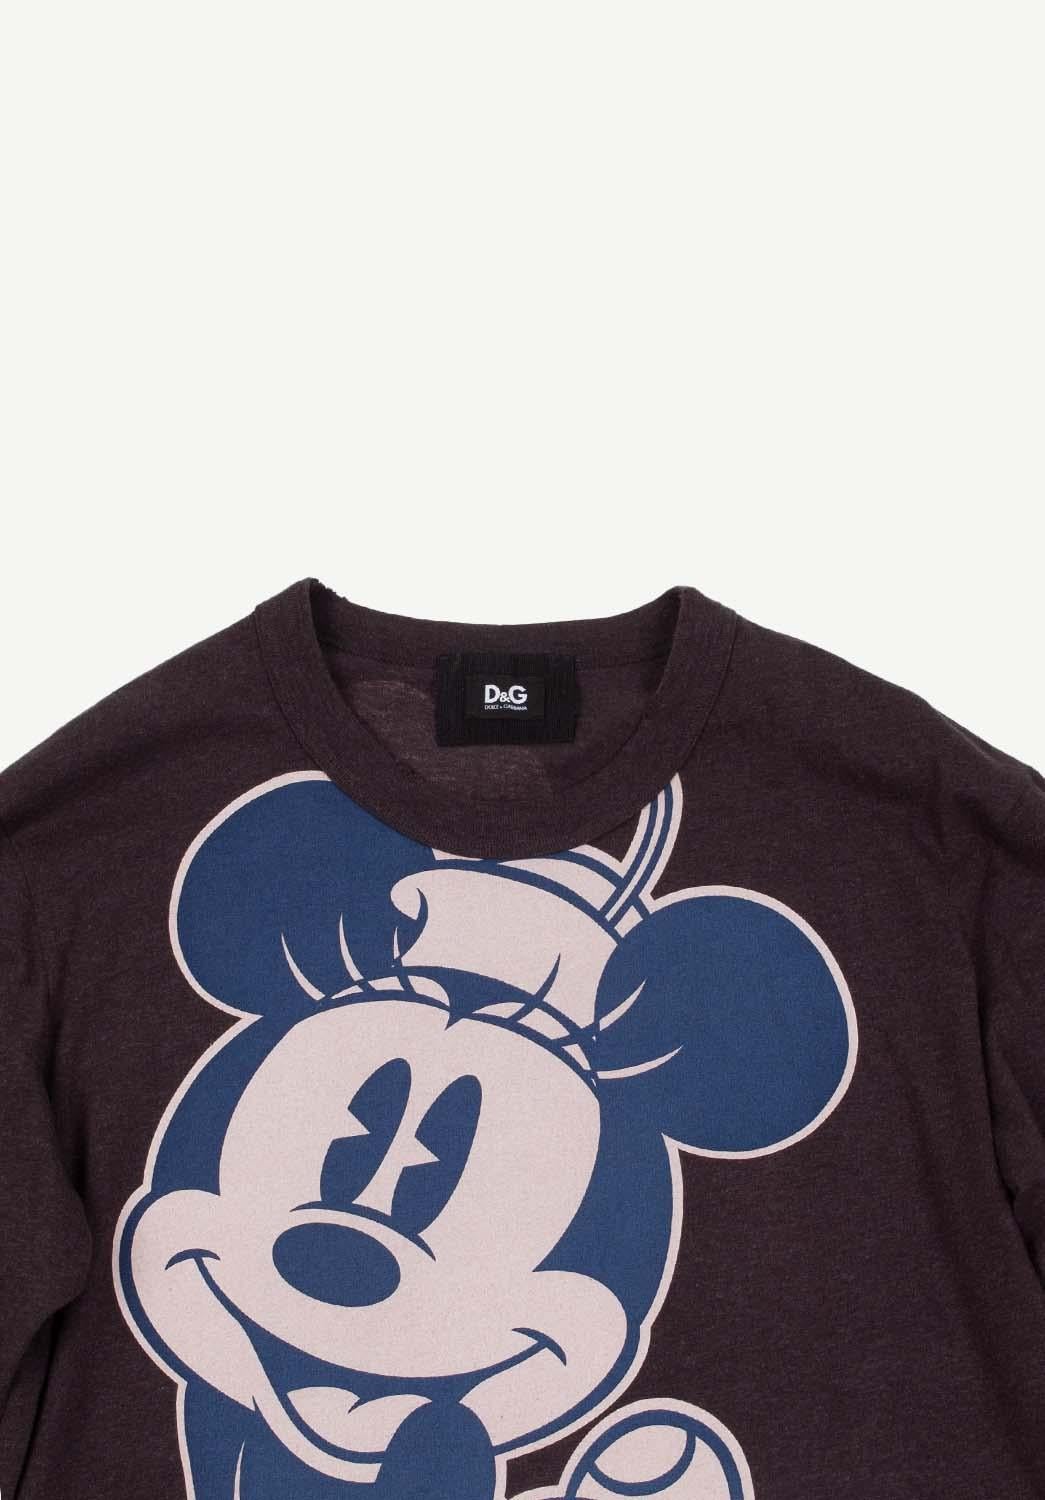 Item for sale is 100% genuine Vintage Dolce&Gabbana Sweatshirt Minnie Mouse S133
Color: Grey/Multi
(An actual color may a bit vary due to individual computer screen interpretation)
Material: 100% cotton
Tag size: 46IT(runs Medium) 
This sweater is